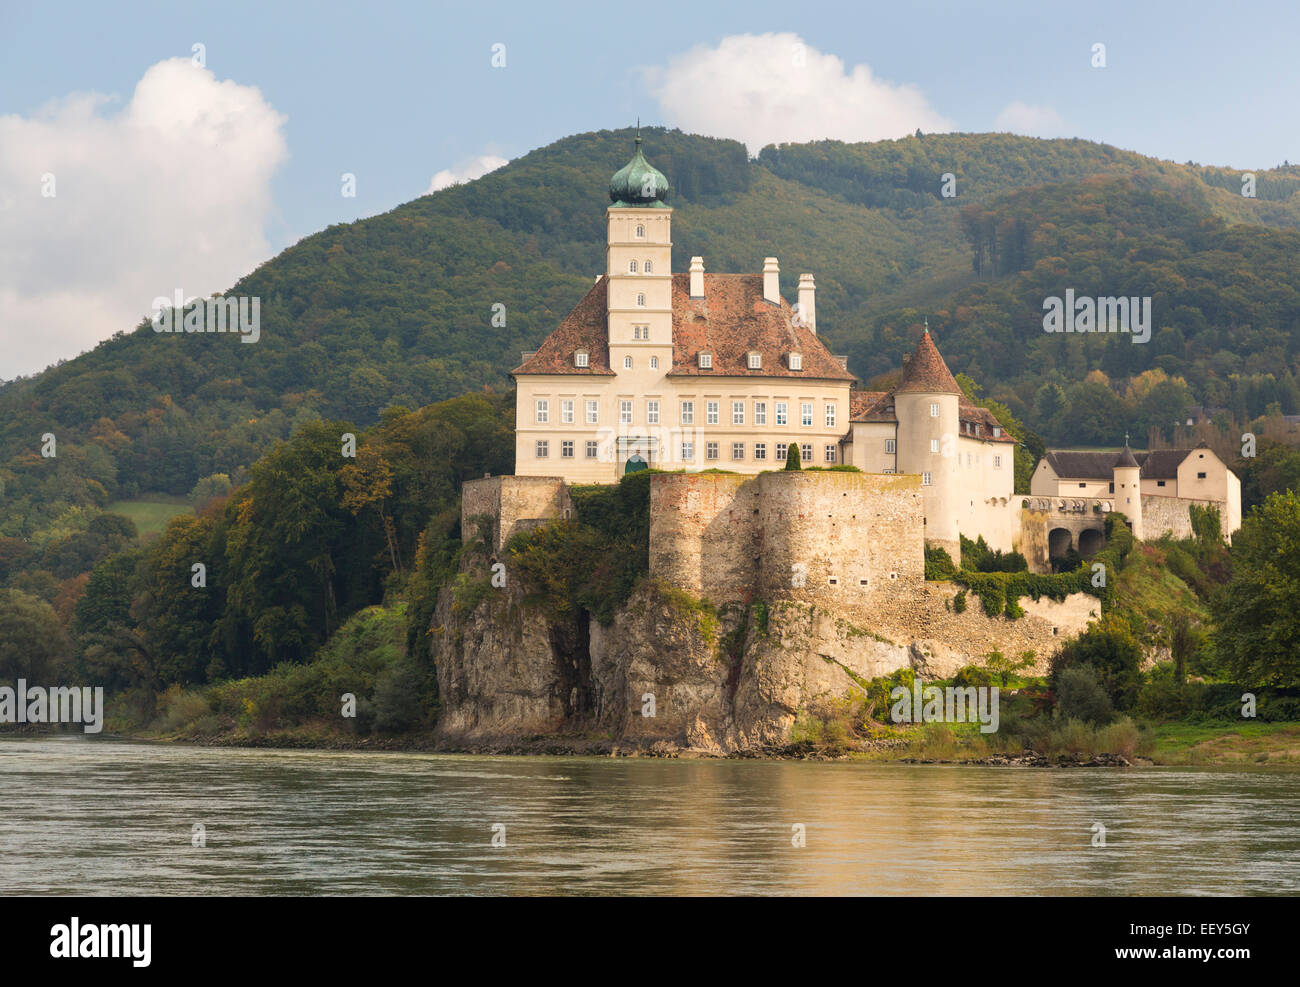 View of Schloss Schoenbuehel on rock outcropping on the side of the Danube River near Melk, Austria Stock Photo